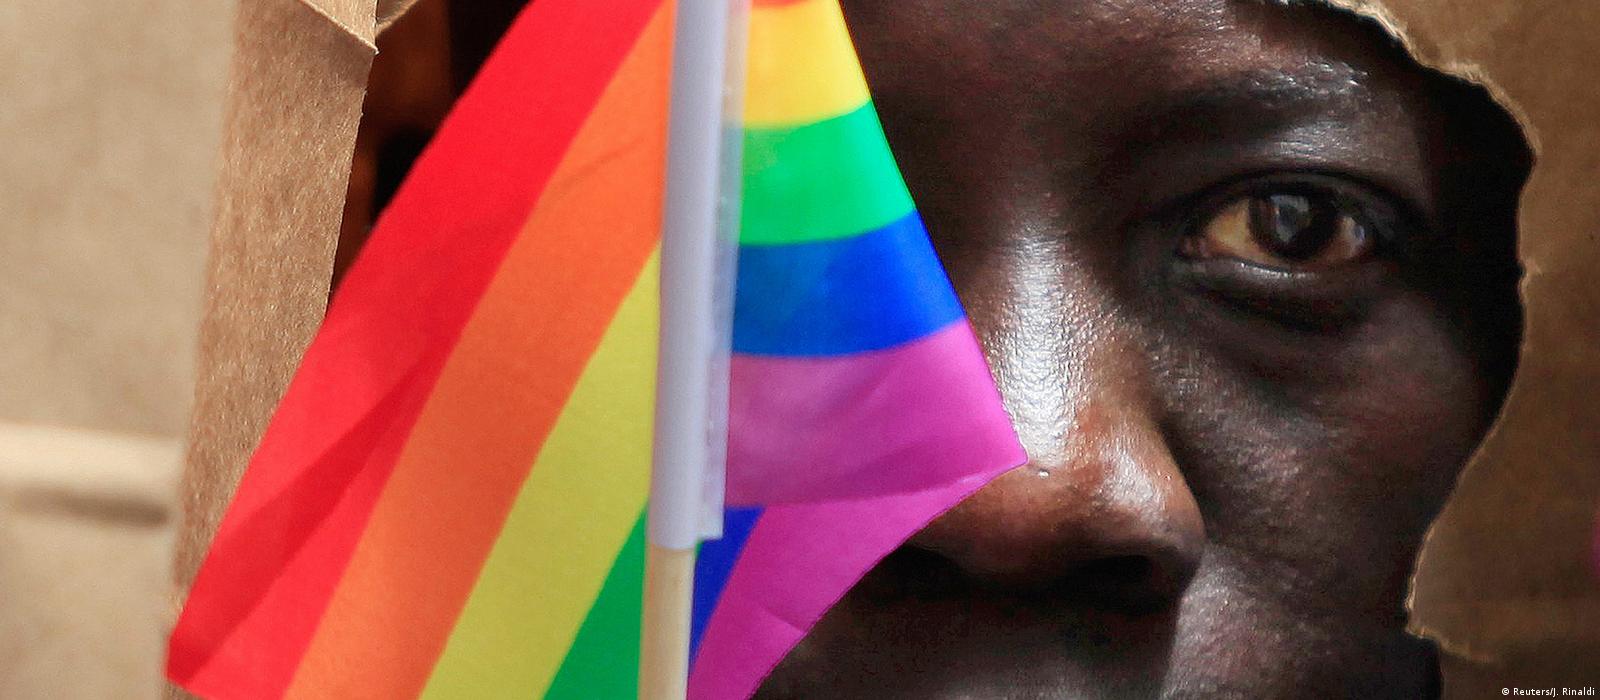 Why Africa is a difficult place for homosexuals? â€“ DW â€“ 12/04/2019